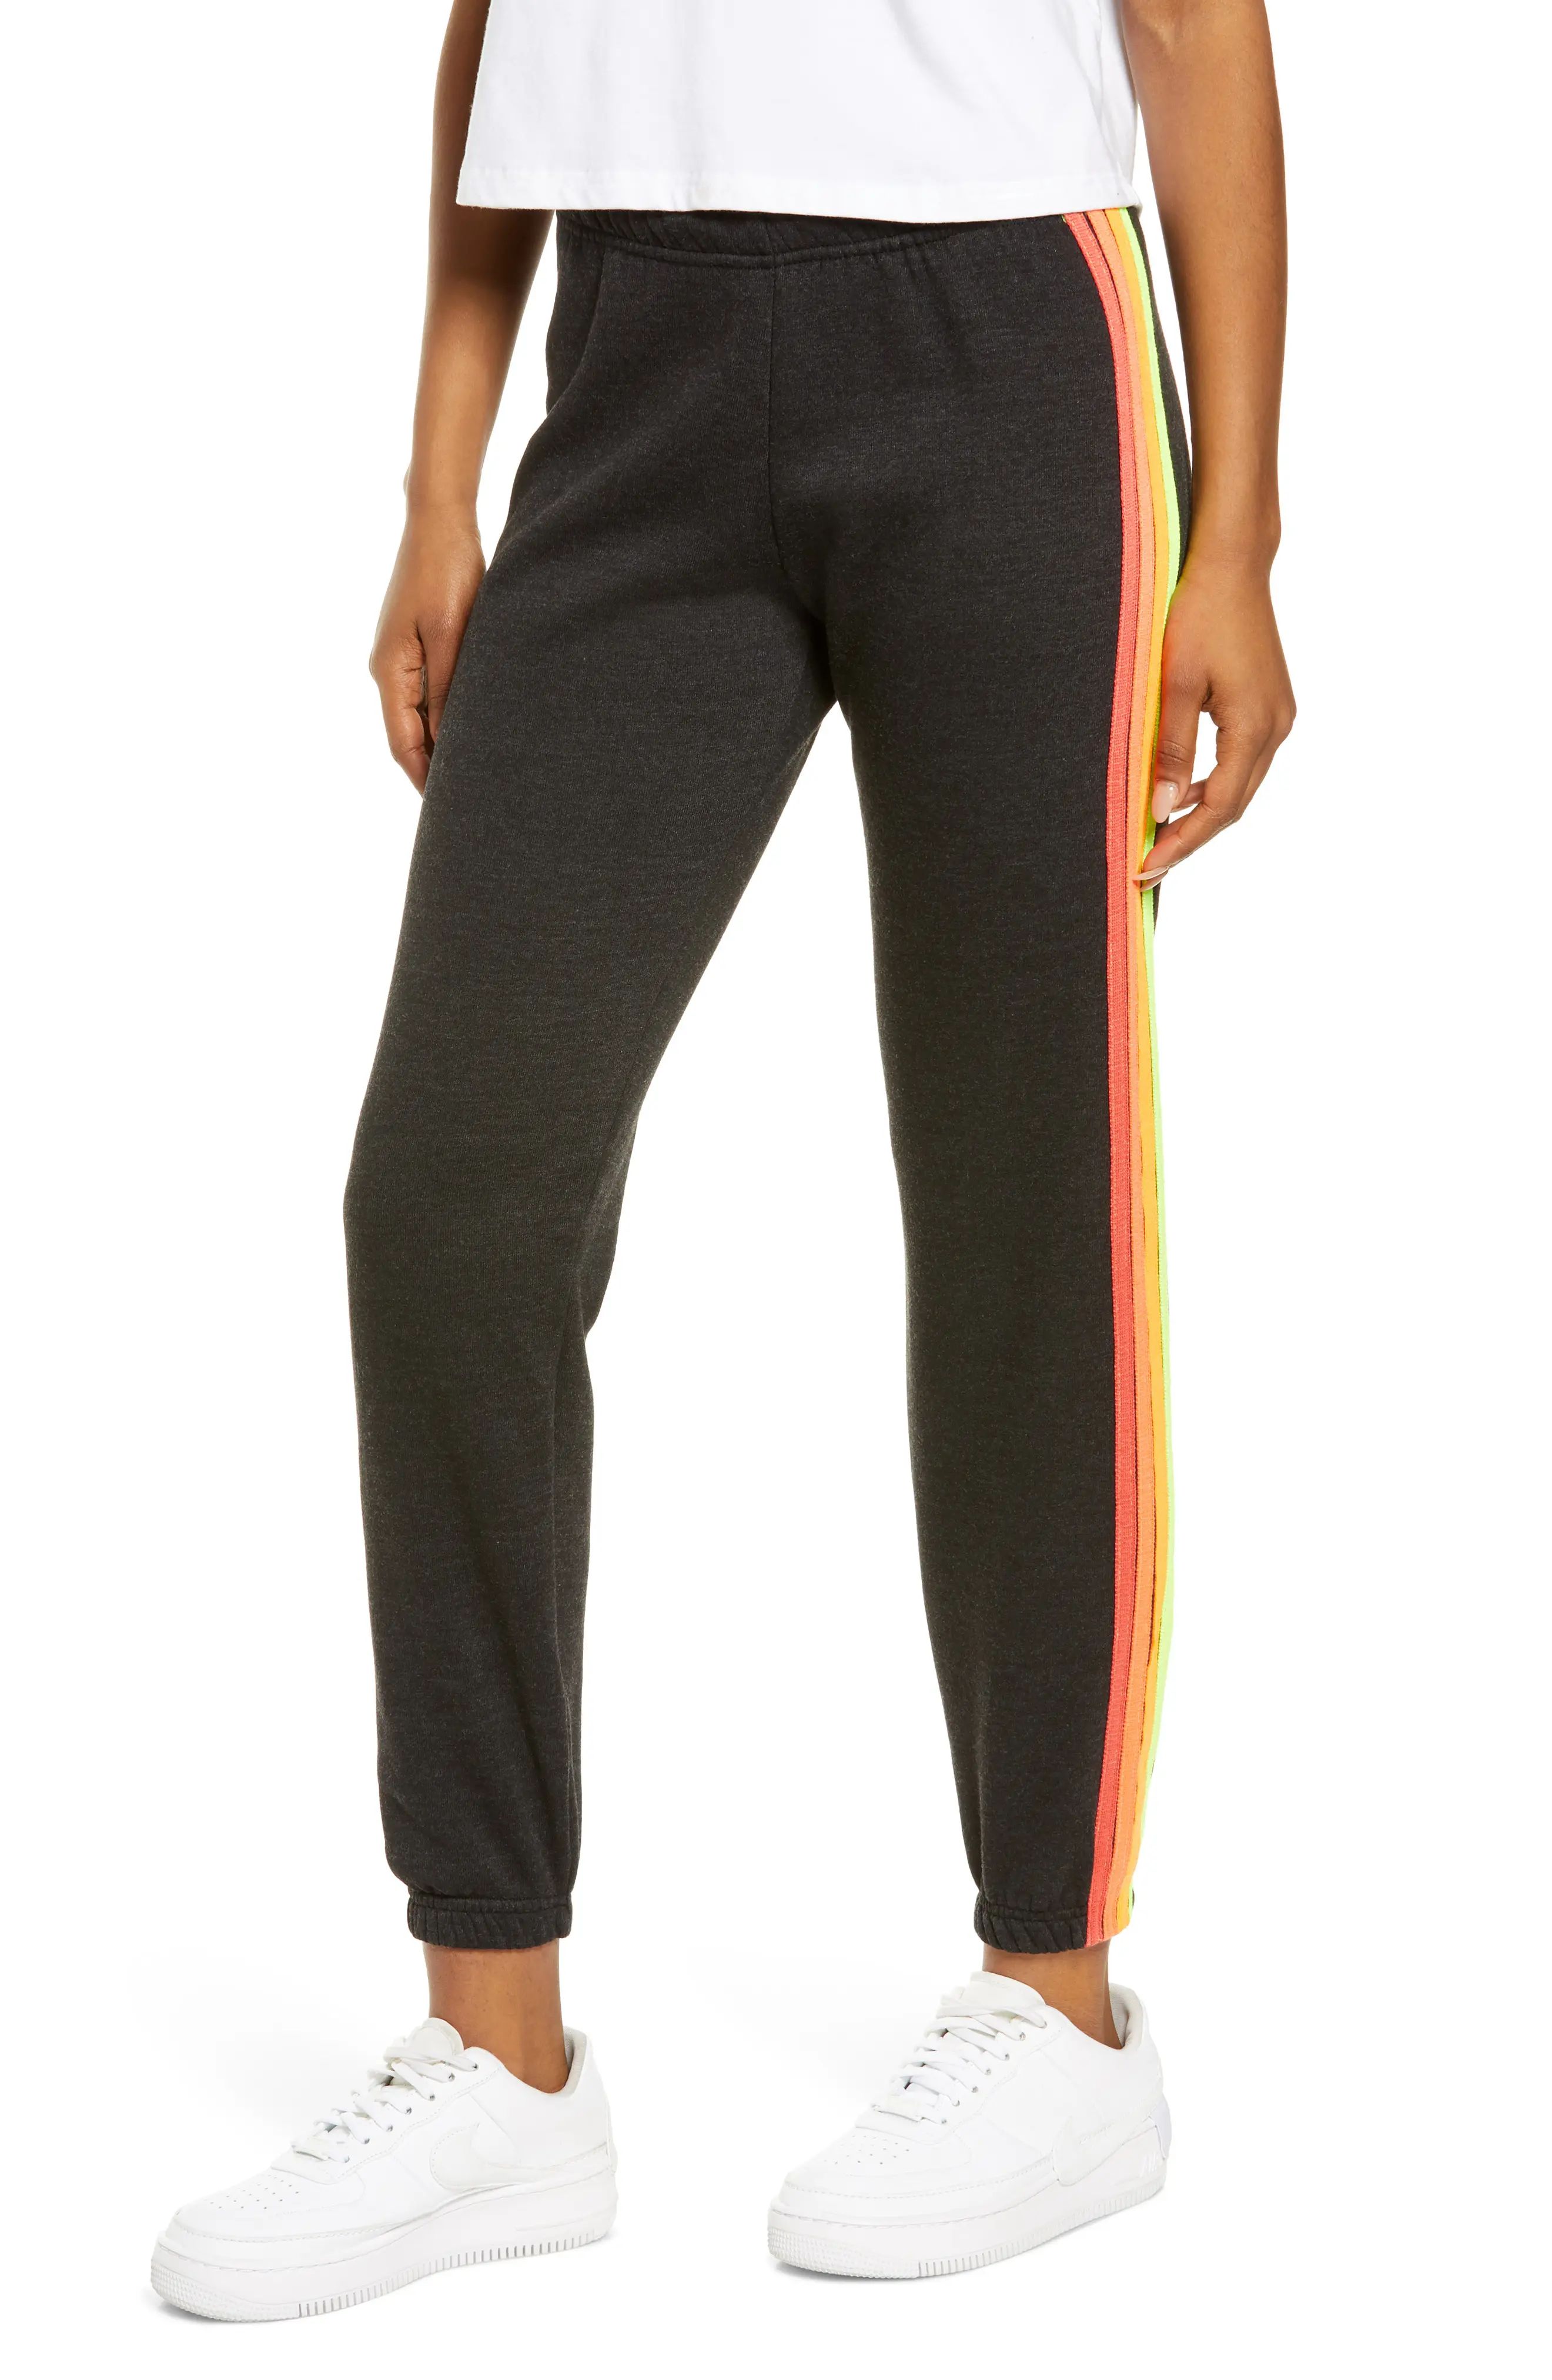 Aviator Nation Four Stripe Sweatpants, Size Small in Black/Neon at Nordstrom | Nordstrom